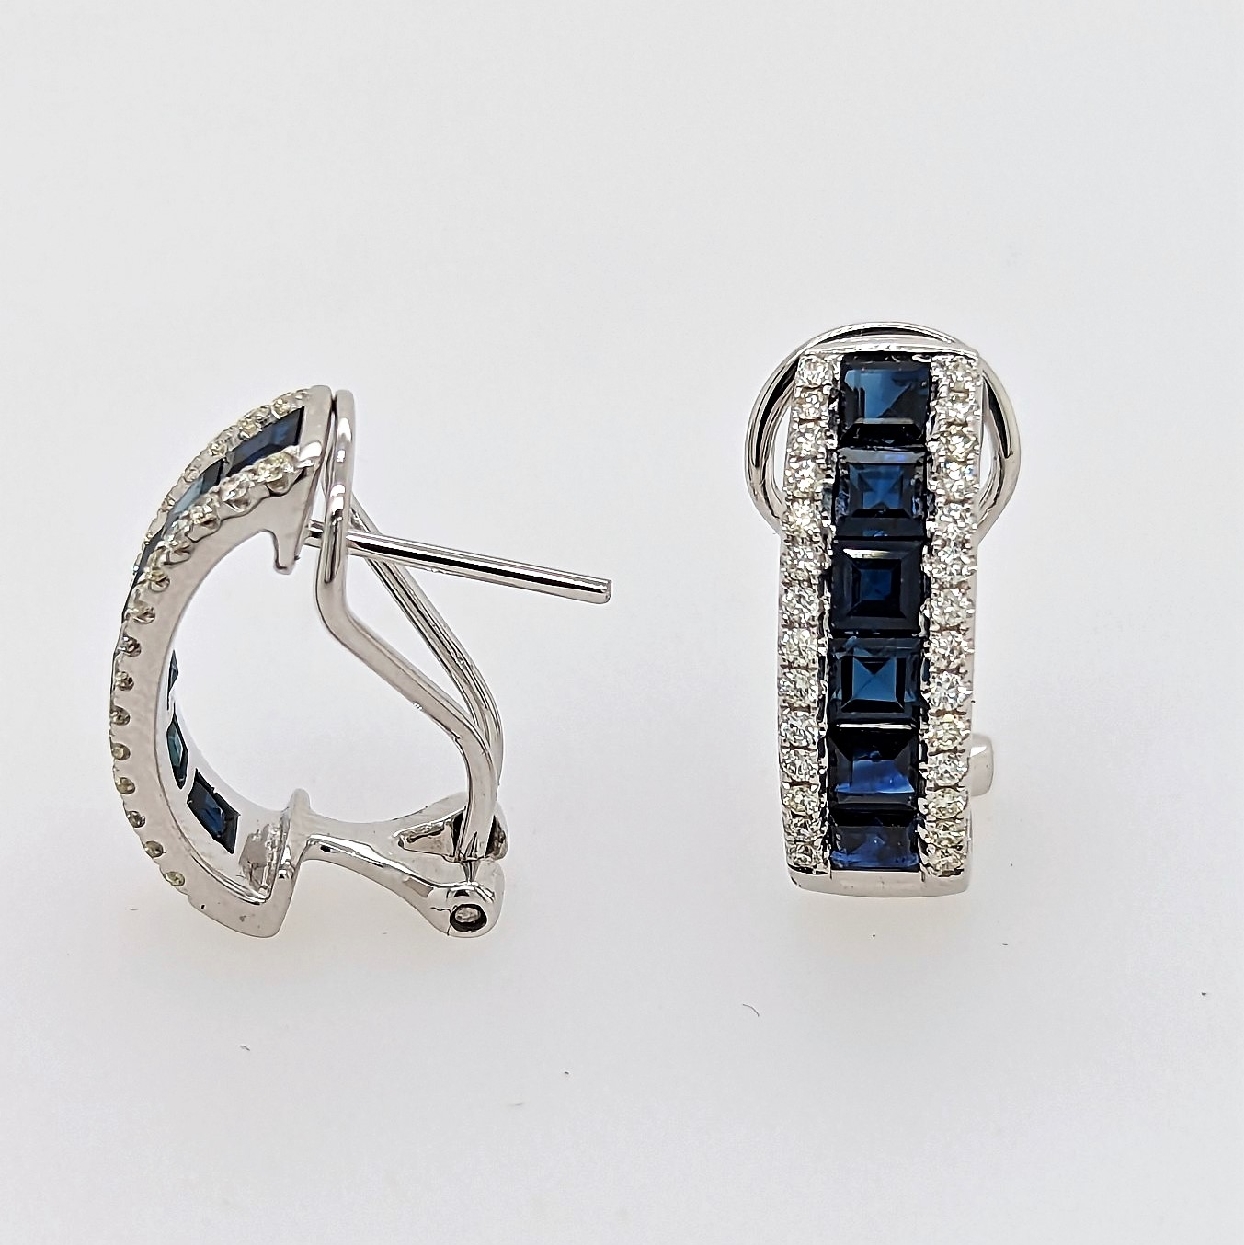 14K White Gold Princess Cut Sapphire and Diamond Earrings with Omega Backs
2.55CTTW Sapphires
0.40CTTW Diamonds